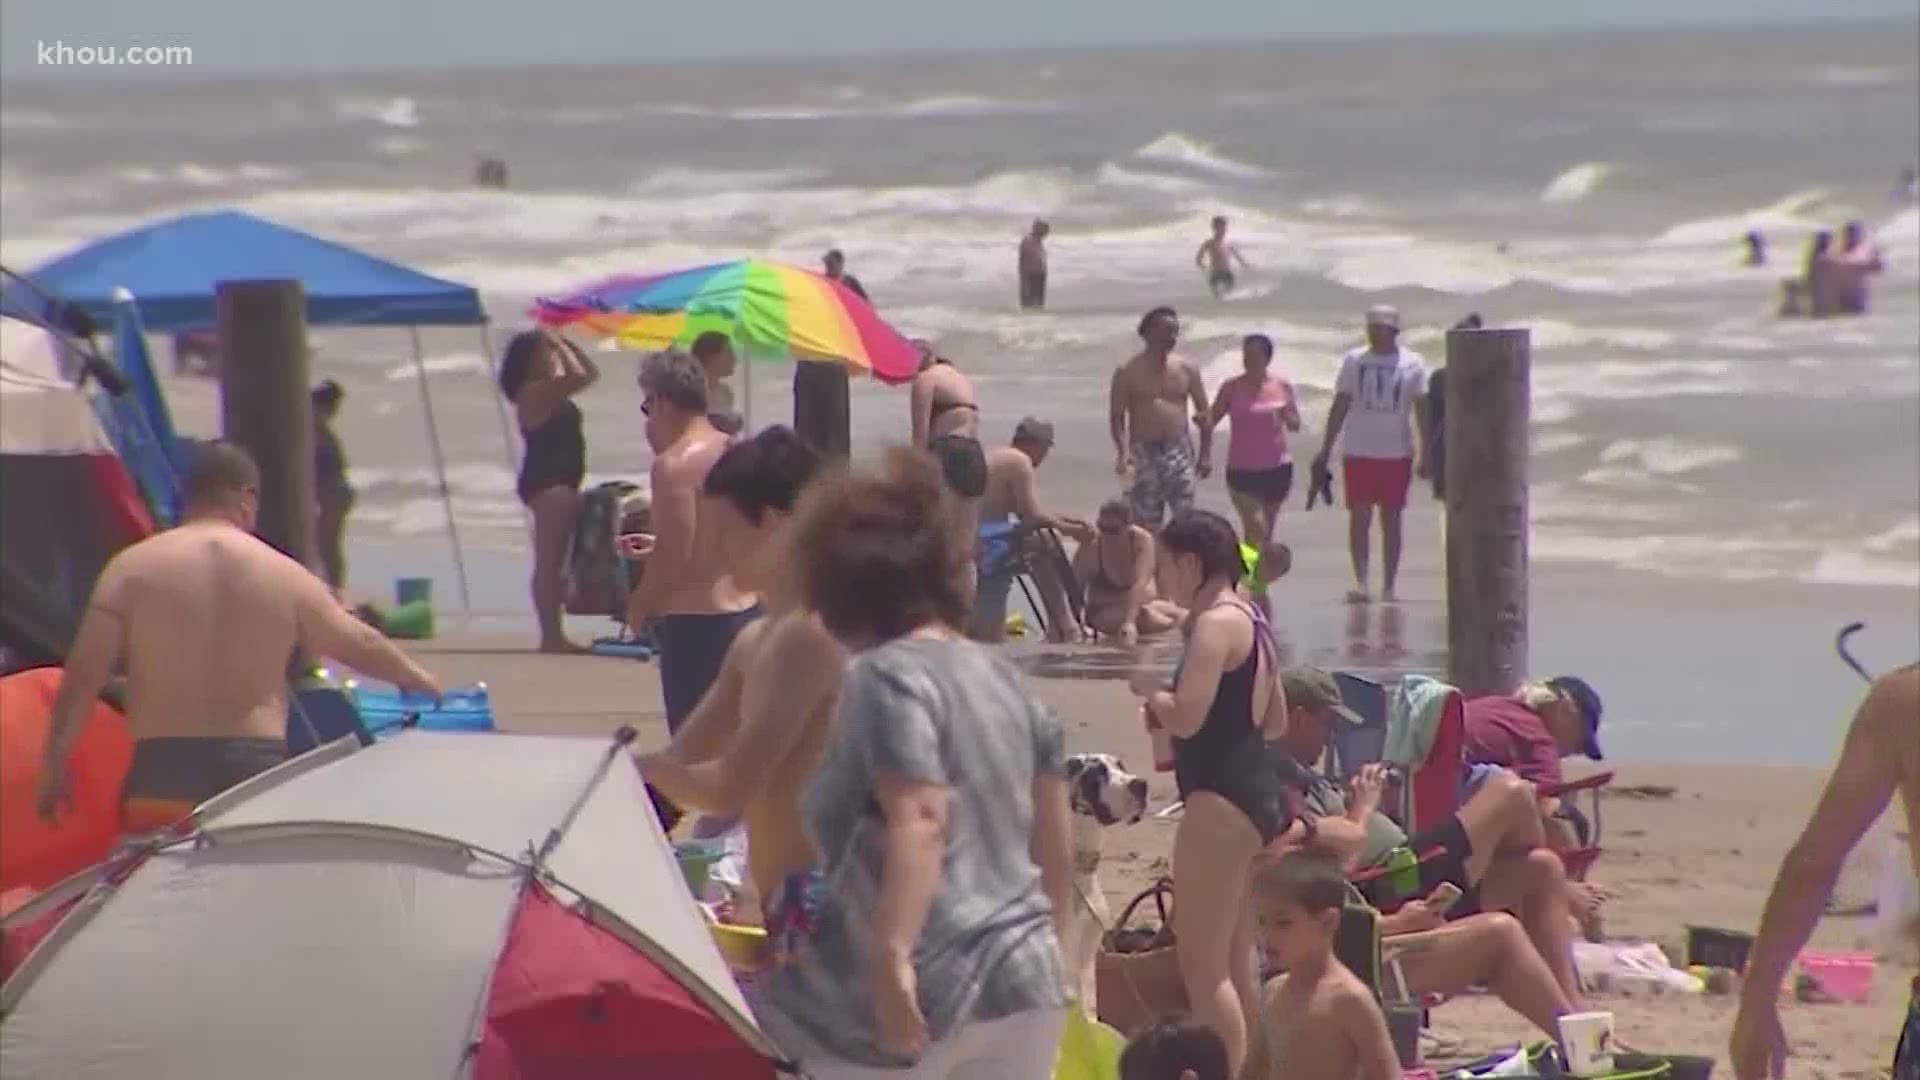 If you rented a house on Bolivar Peninsula for Fourth of July weekend, the county is giving you limited access to the beach.